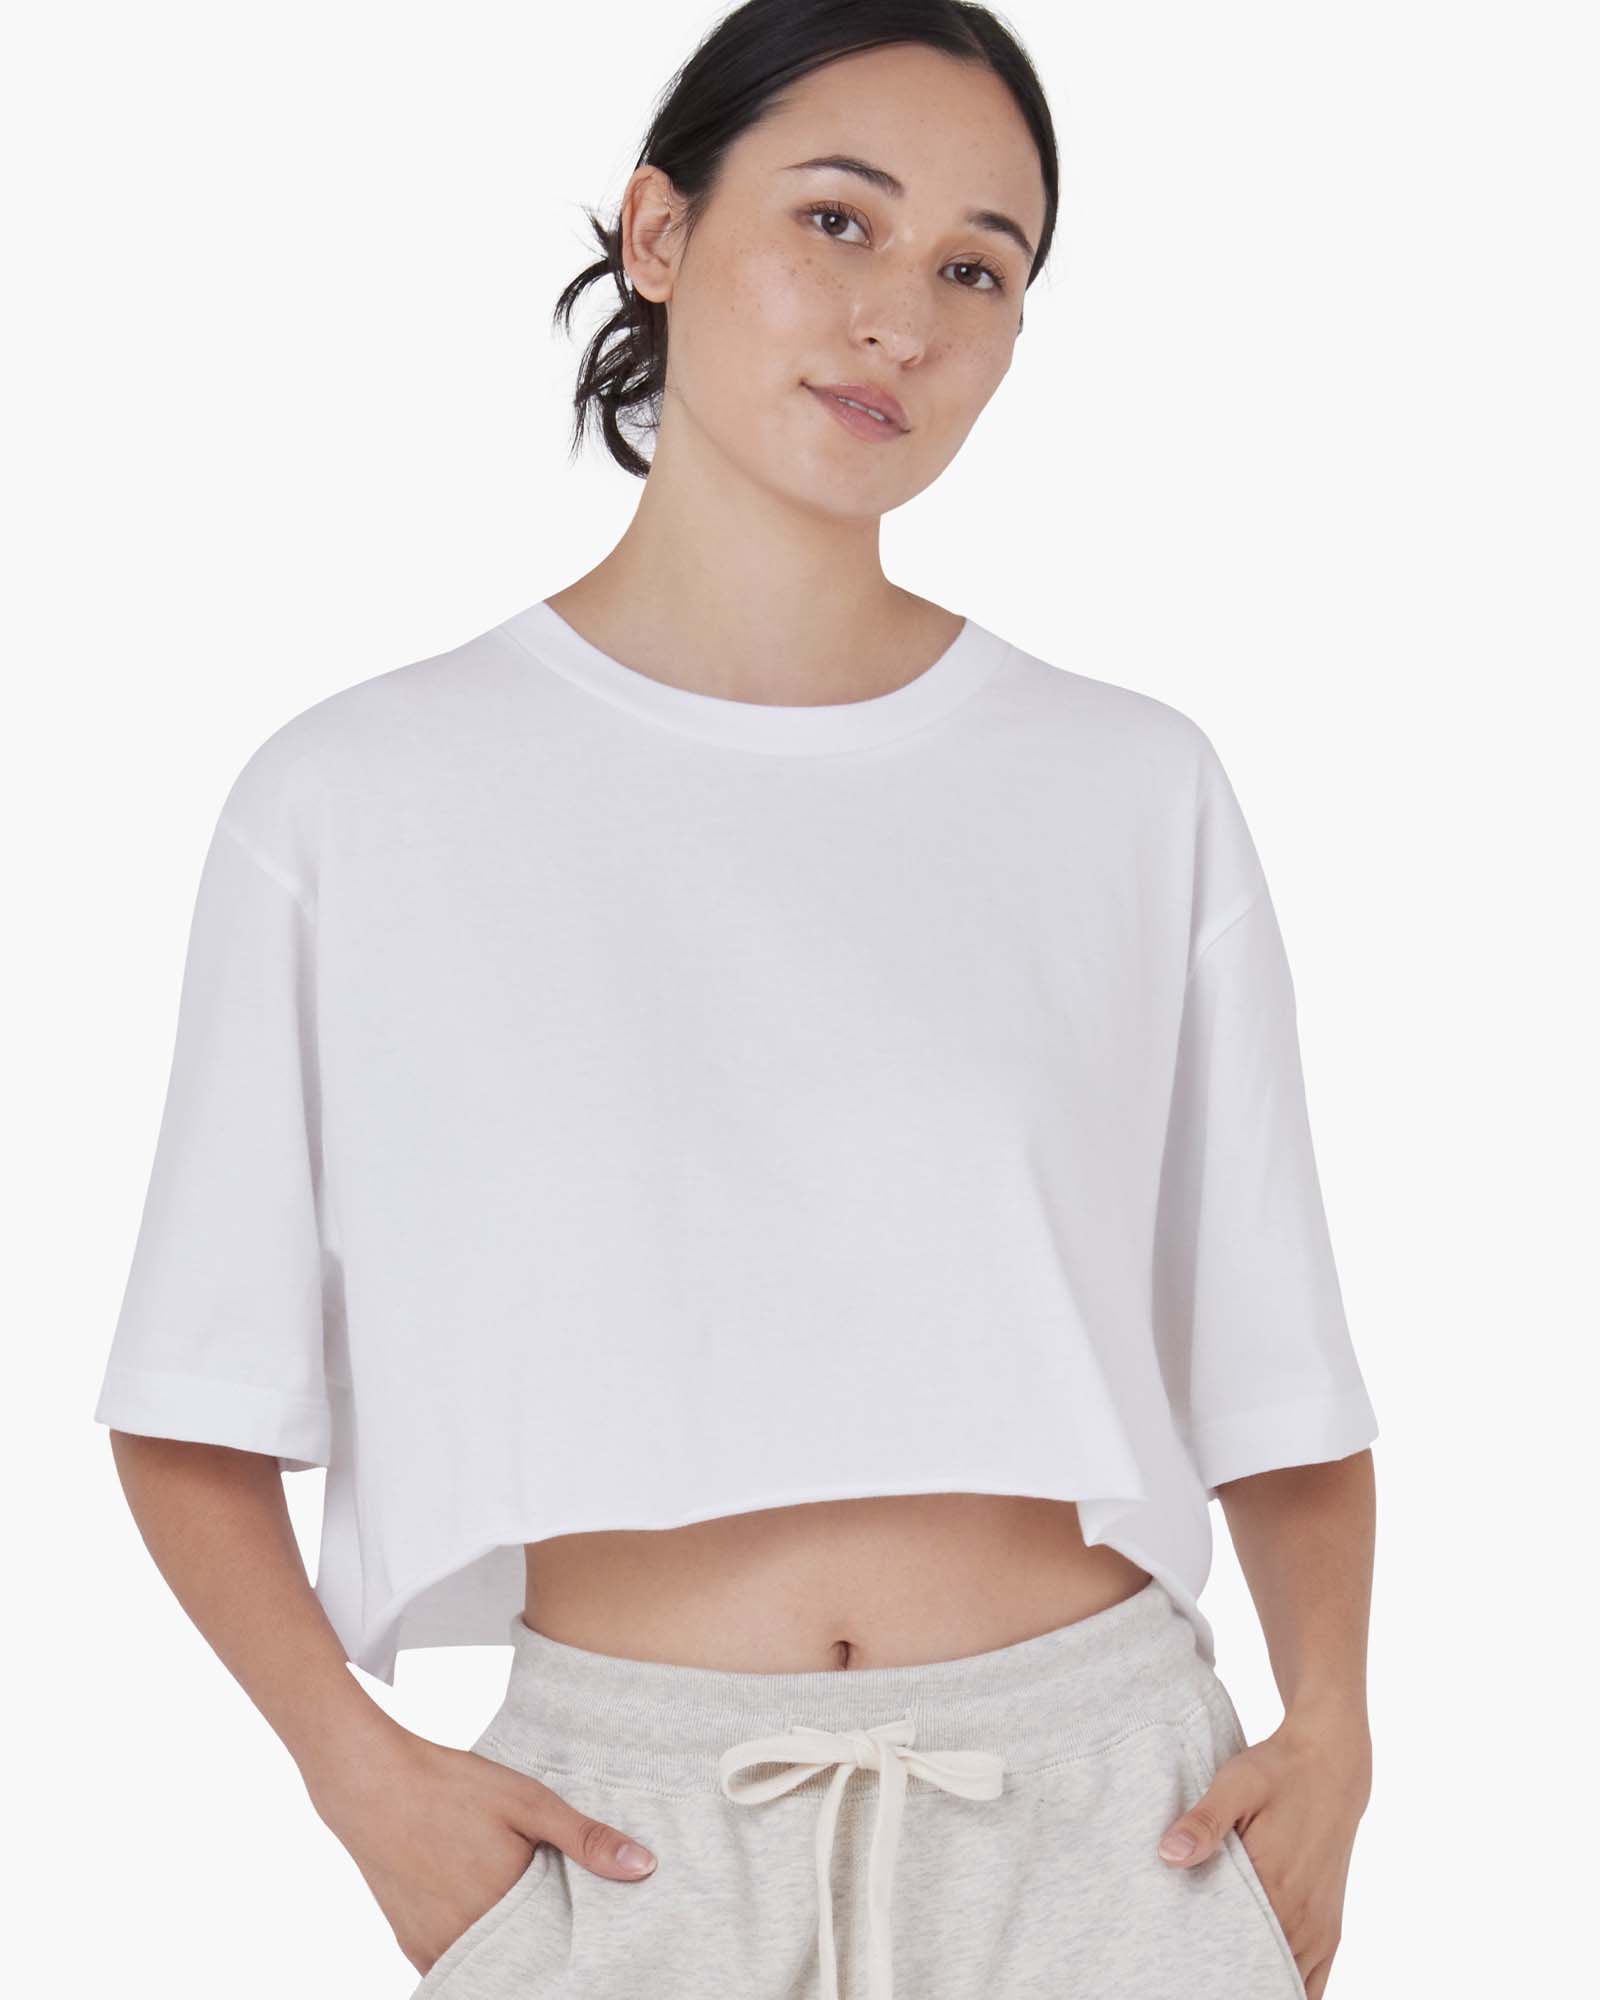 Cropped Tee in White | Clothing TKEES | T-Shirts Women\'s –